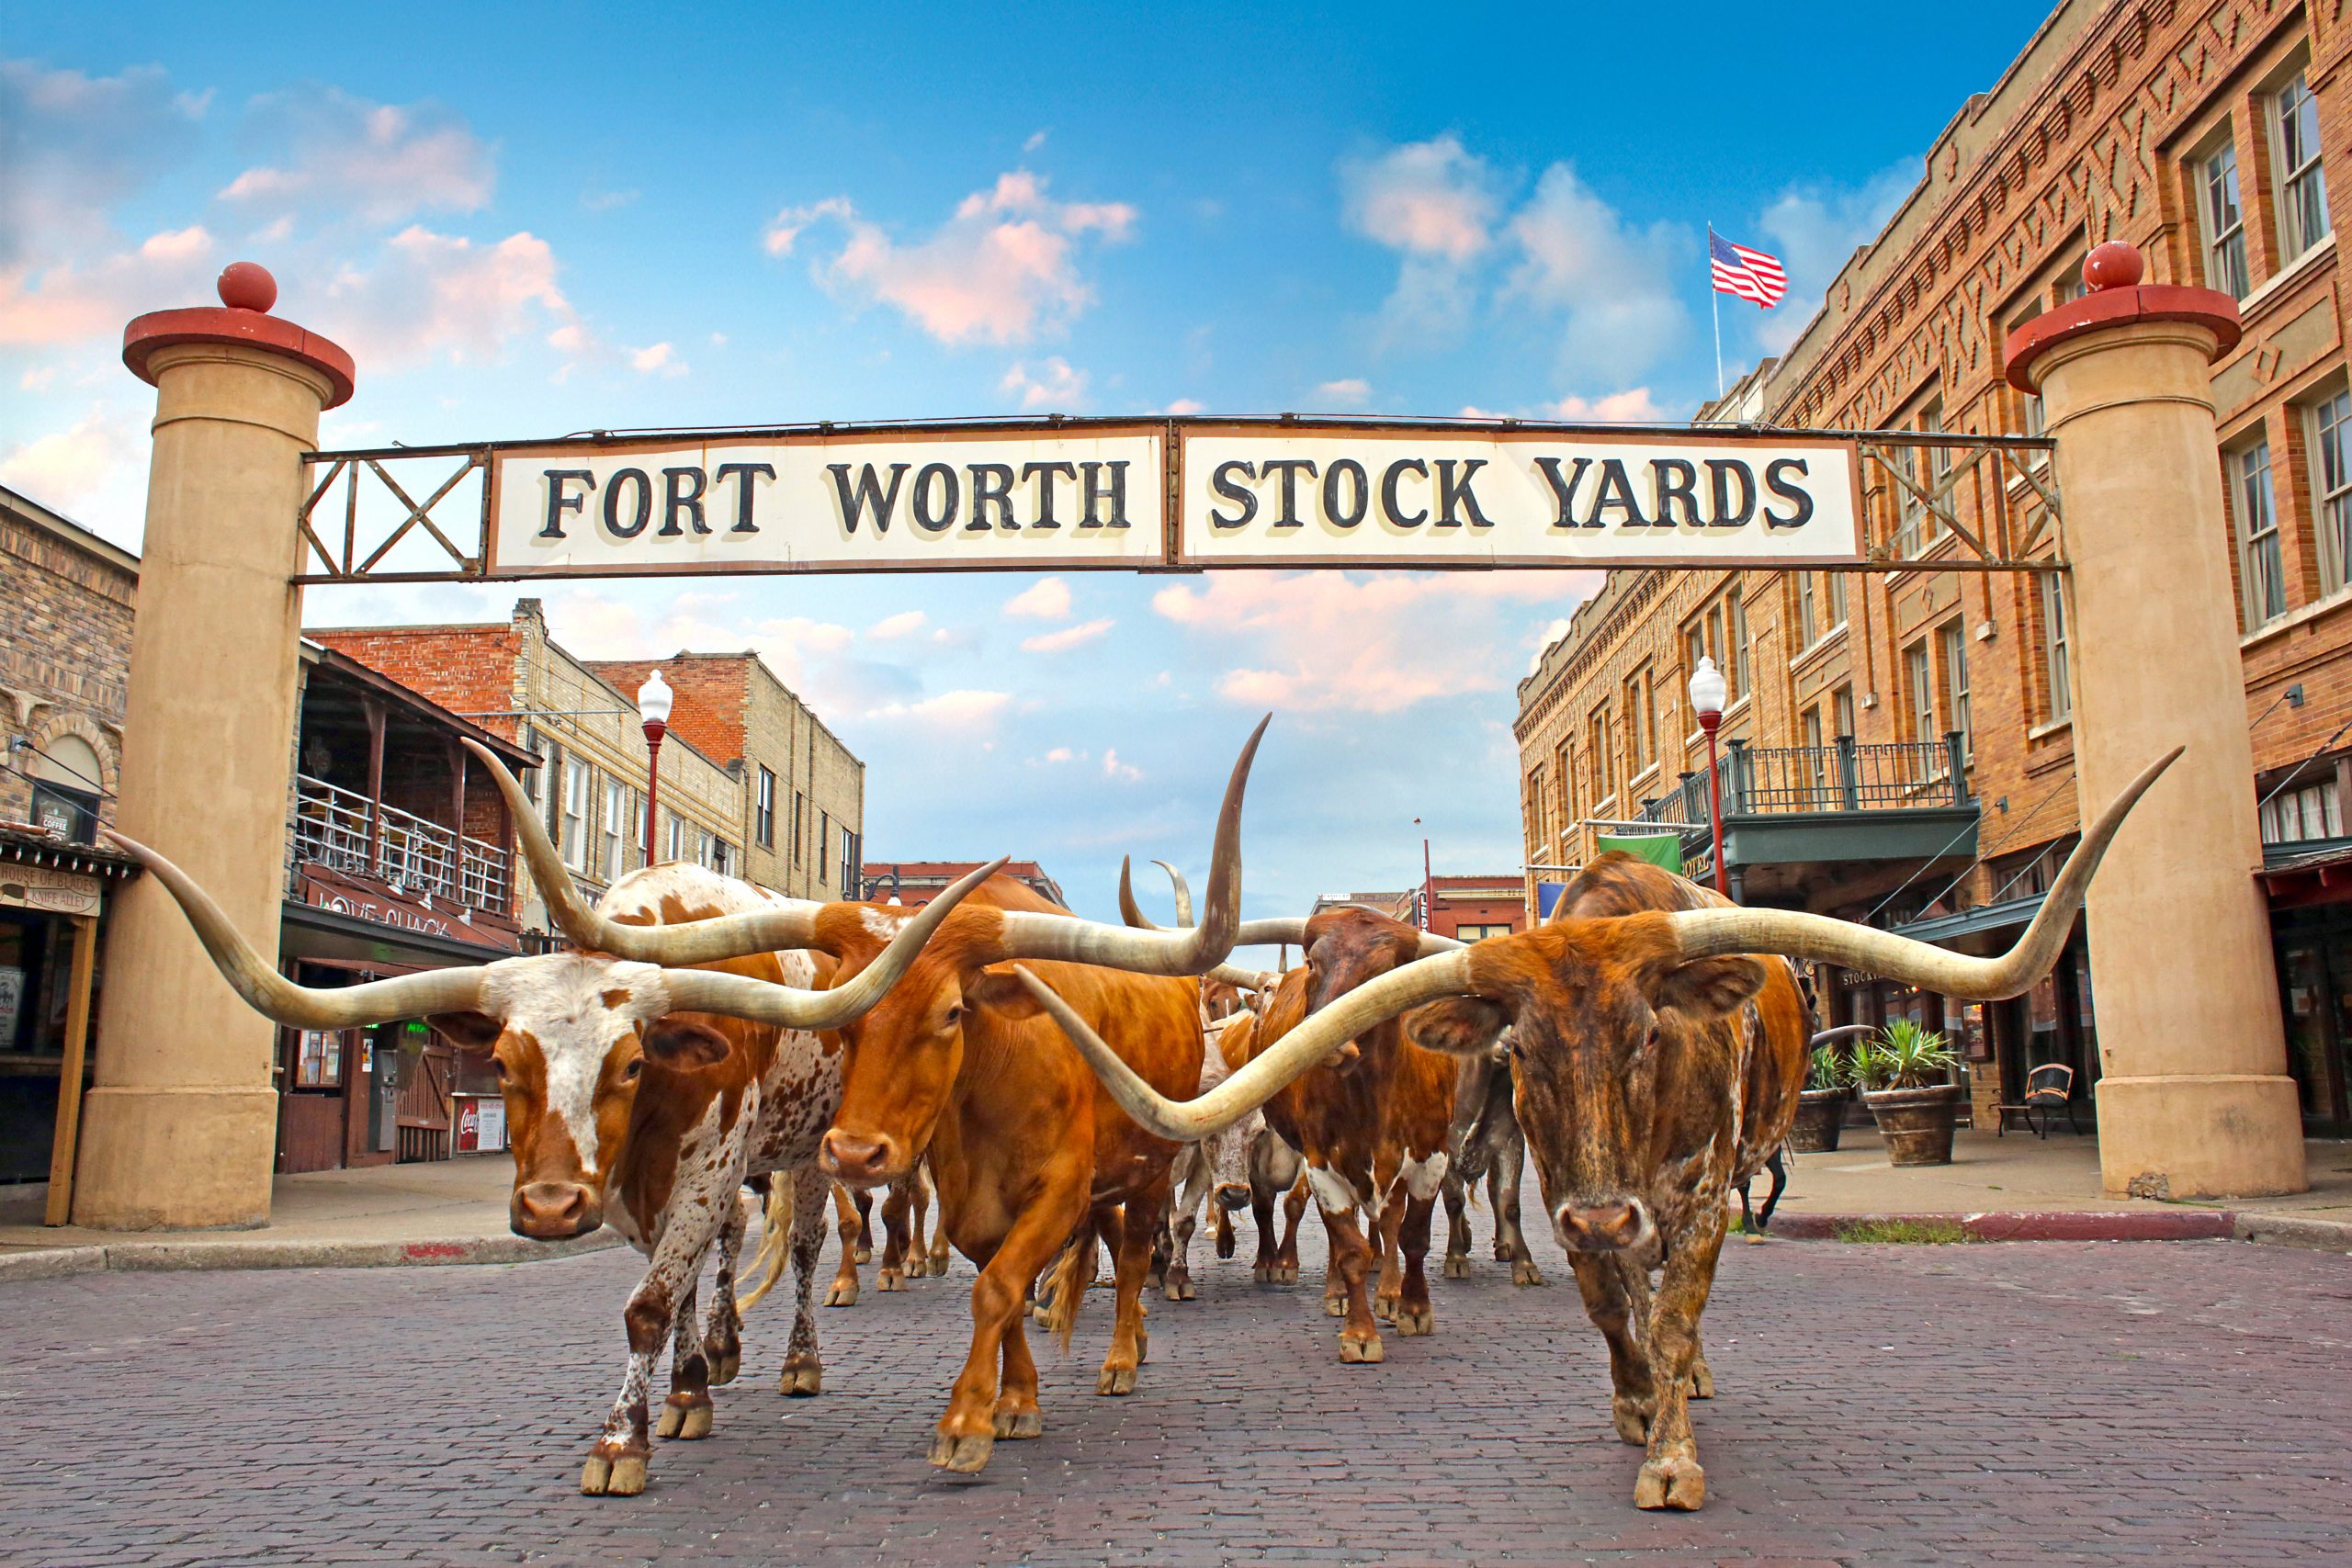 Mule Alley in the Fort Worth Stockyards offers Wrangler NFR Events, Shoppin...